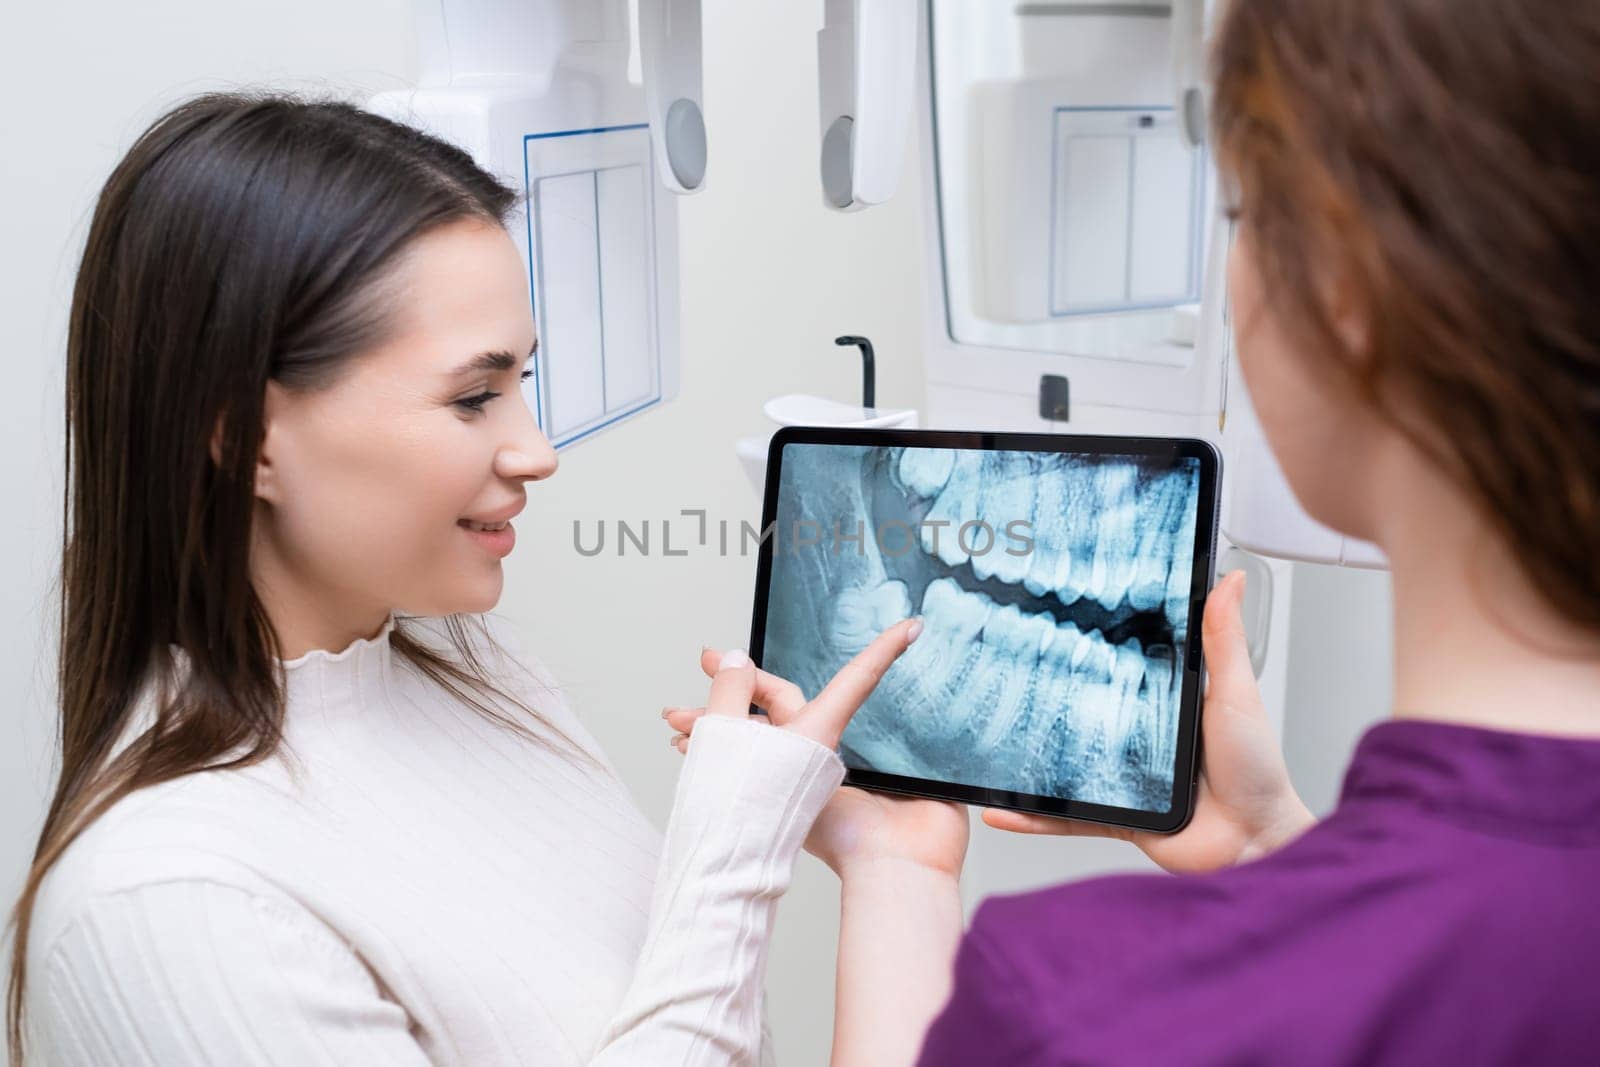 Dentist showing to patient jaw teeth x ray image at dental office.